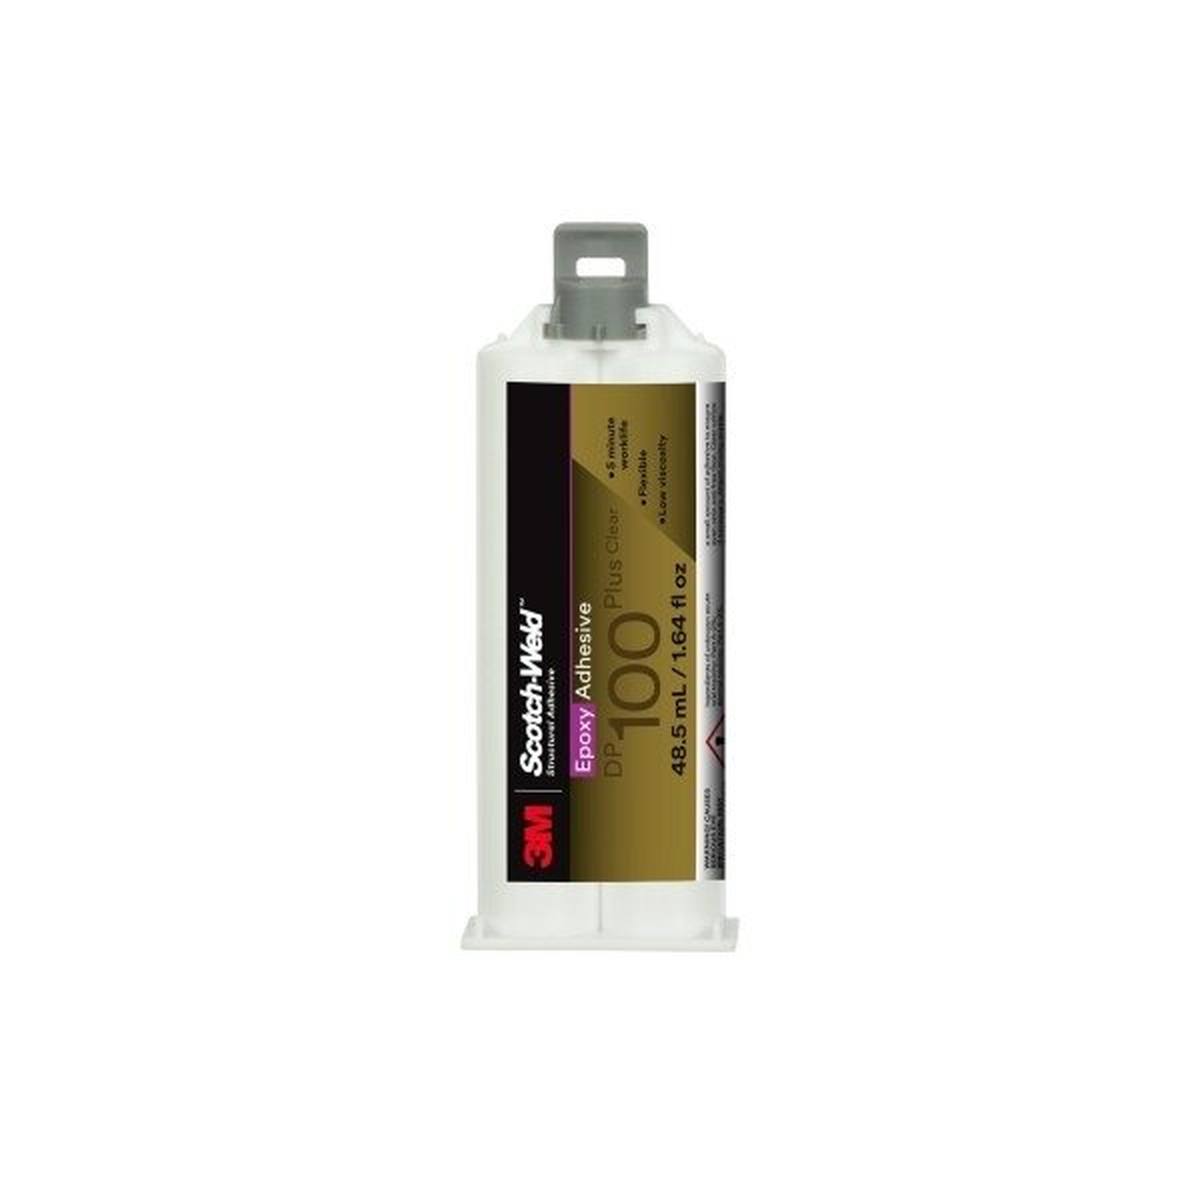 3M Scotch-Weld 2-component construction adhesive based on epoxy resin for the EPX system DP 100 FR, beige, 48.5 ml